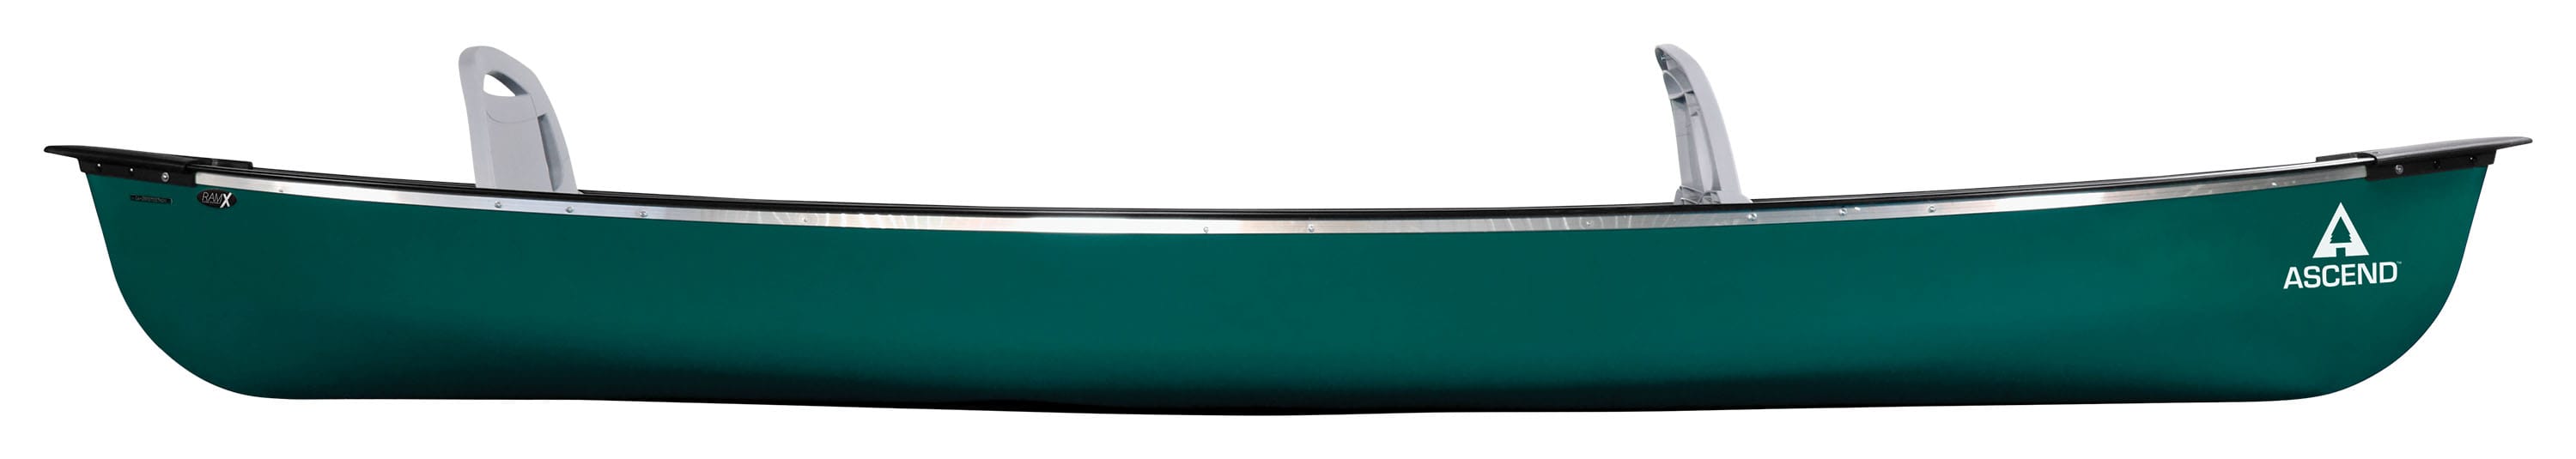 Ascend® 15 DLX Forest Green Canoe